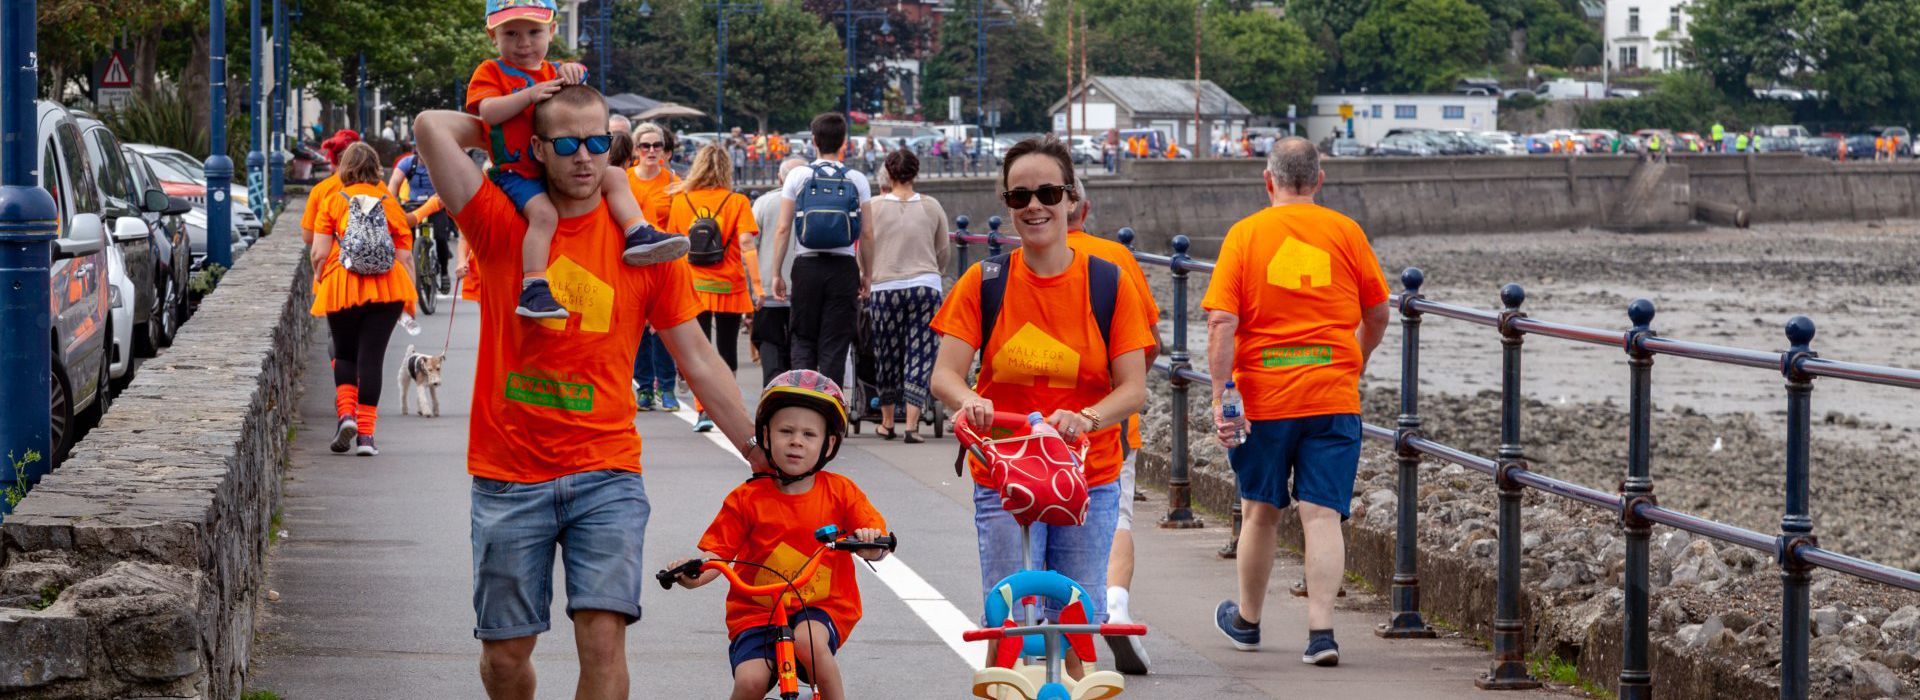 A young family wearing orange Maggie's T-shirts doing the sponsored walk, with a toddler on Dad's shoulder and a child on a bike